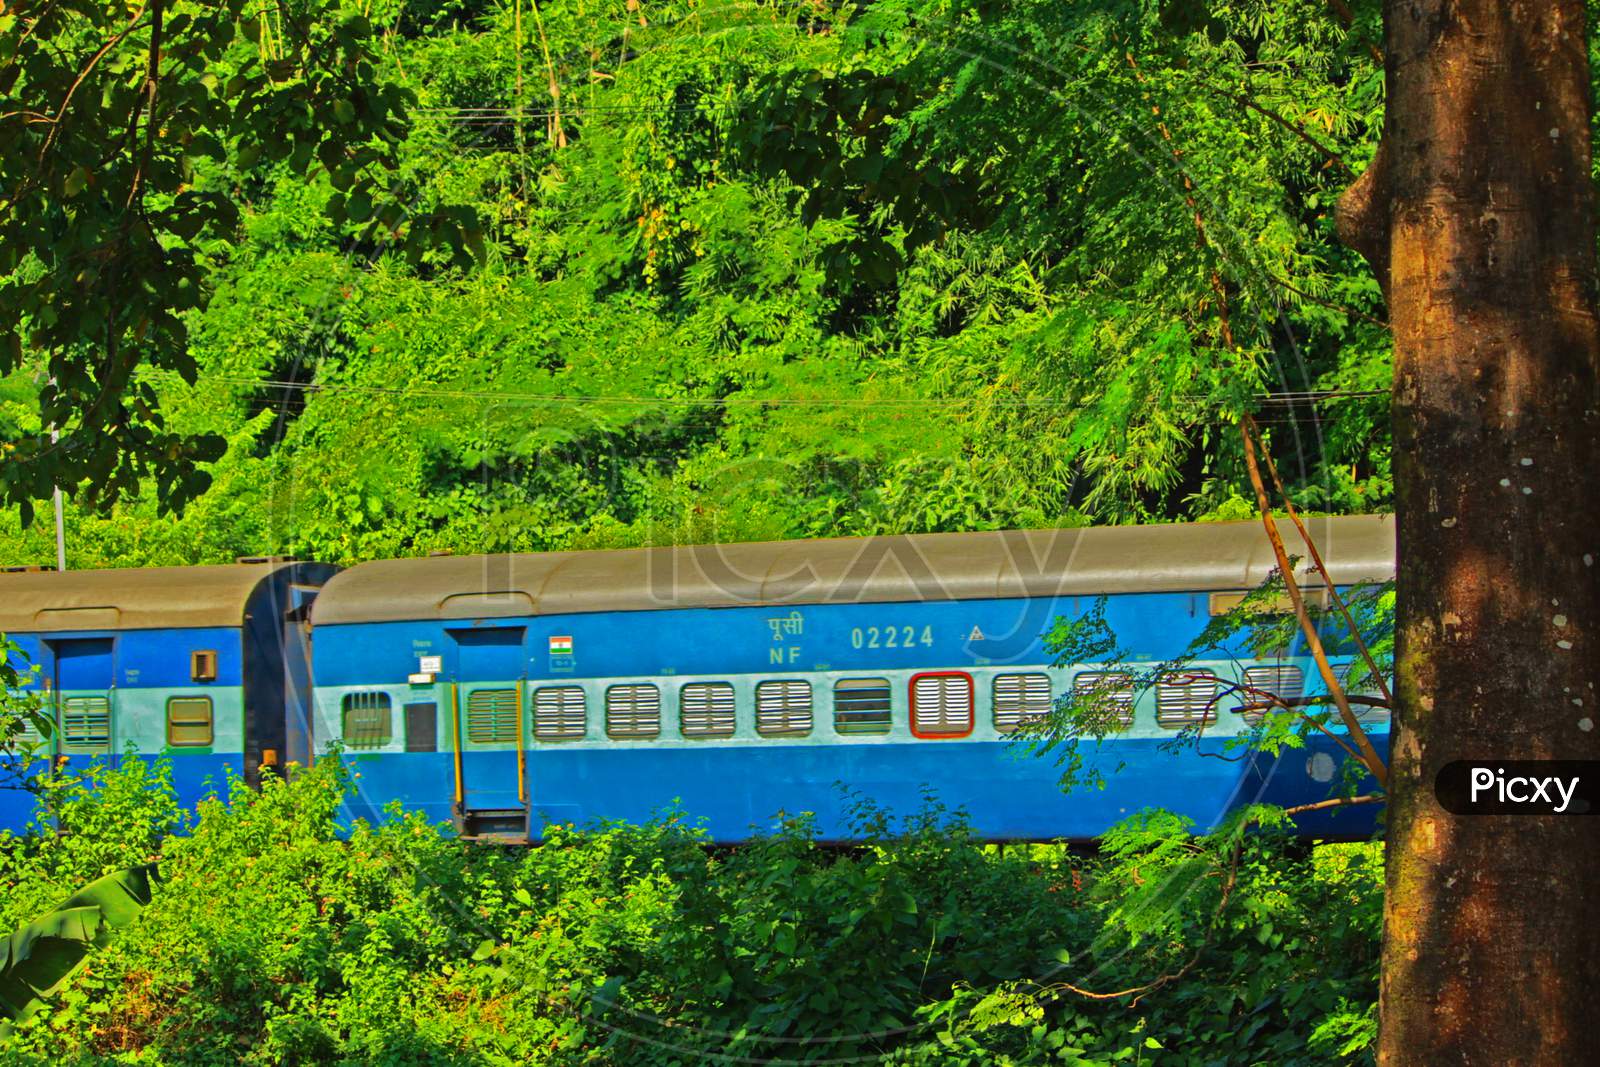 A train in a green forest